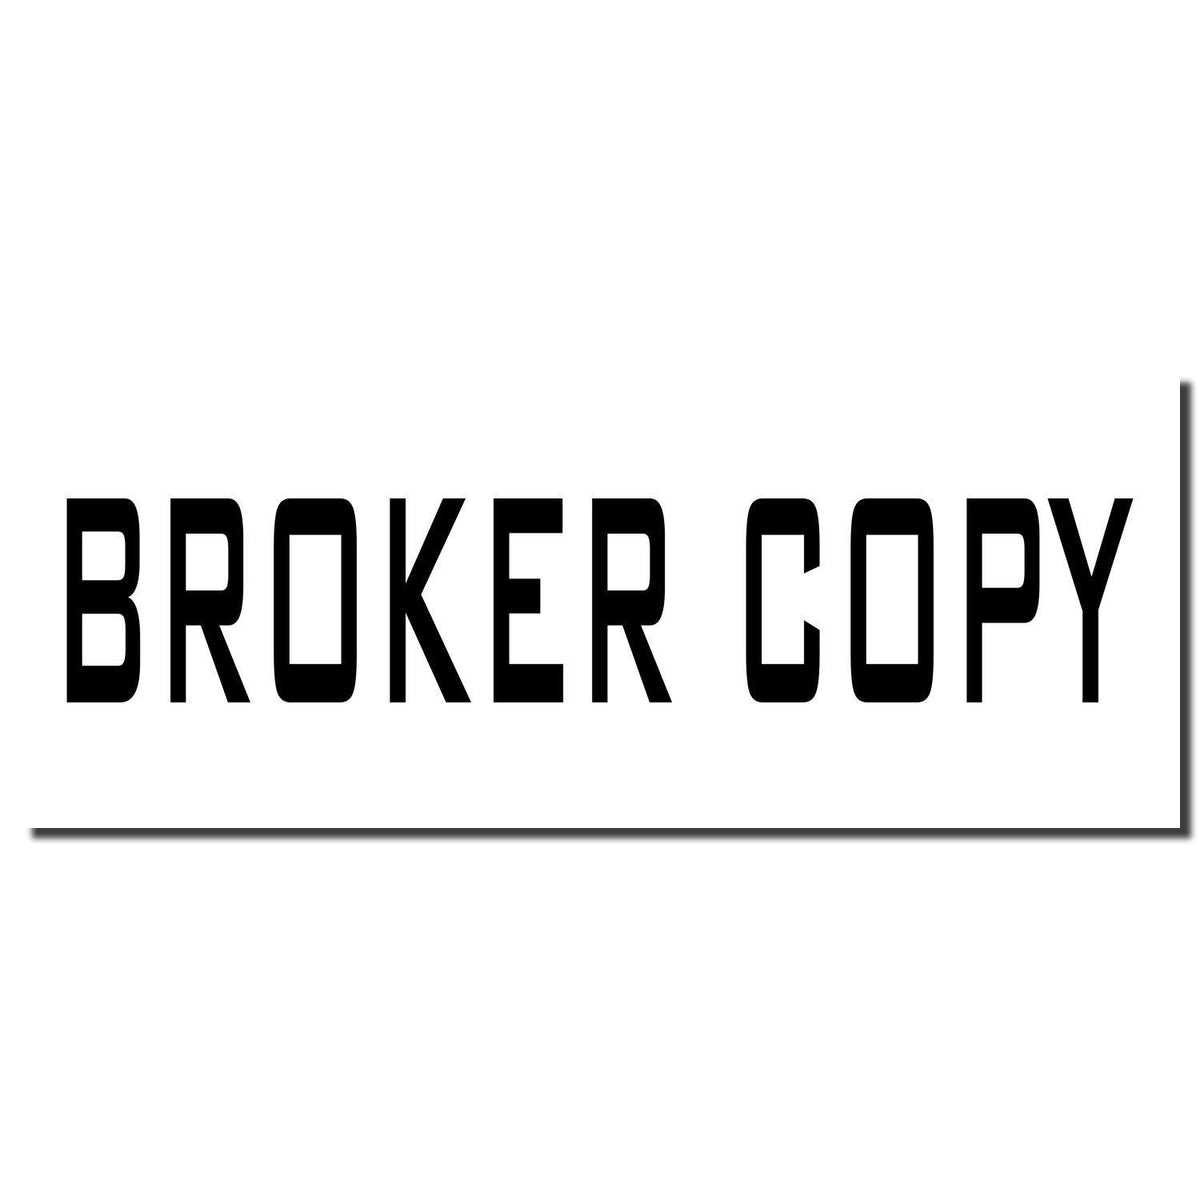 Self Inking Broker Copy Stamp - Engineer Seal Stamps - Brand_Trodat, Impression Size_Small, Stamp Type_Self-Inking Stamp, Type of Use_Finance